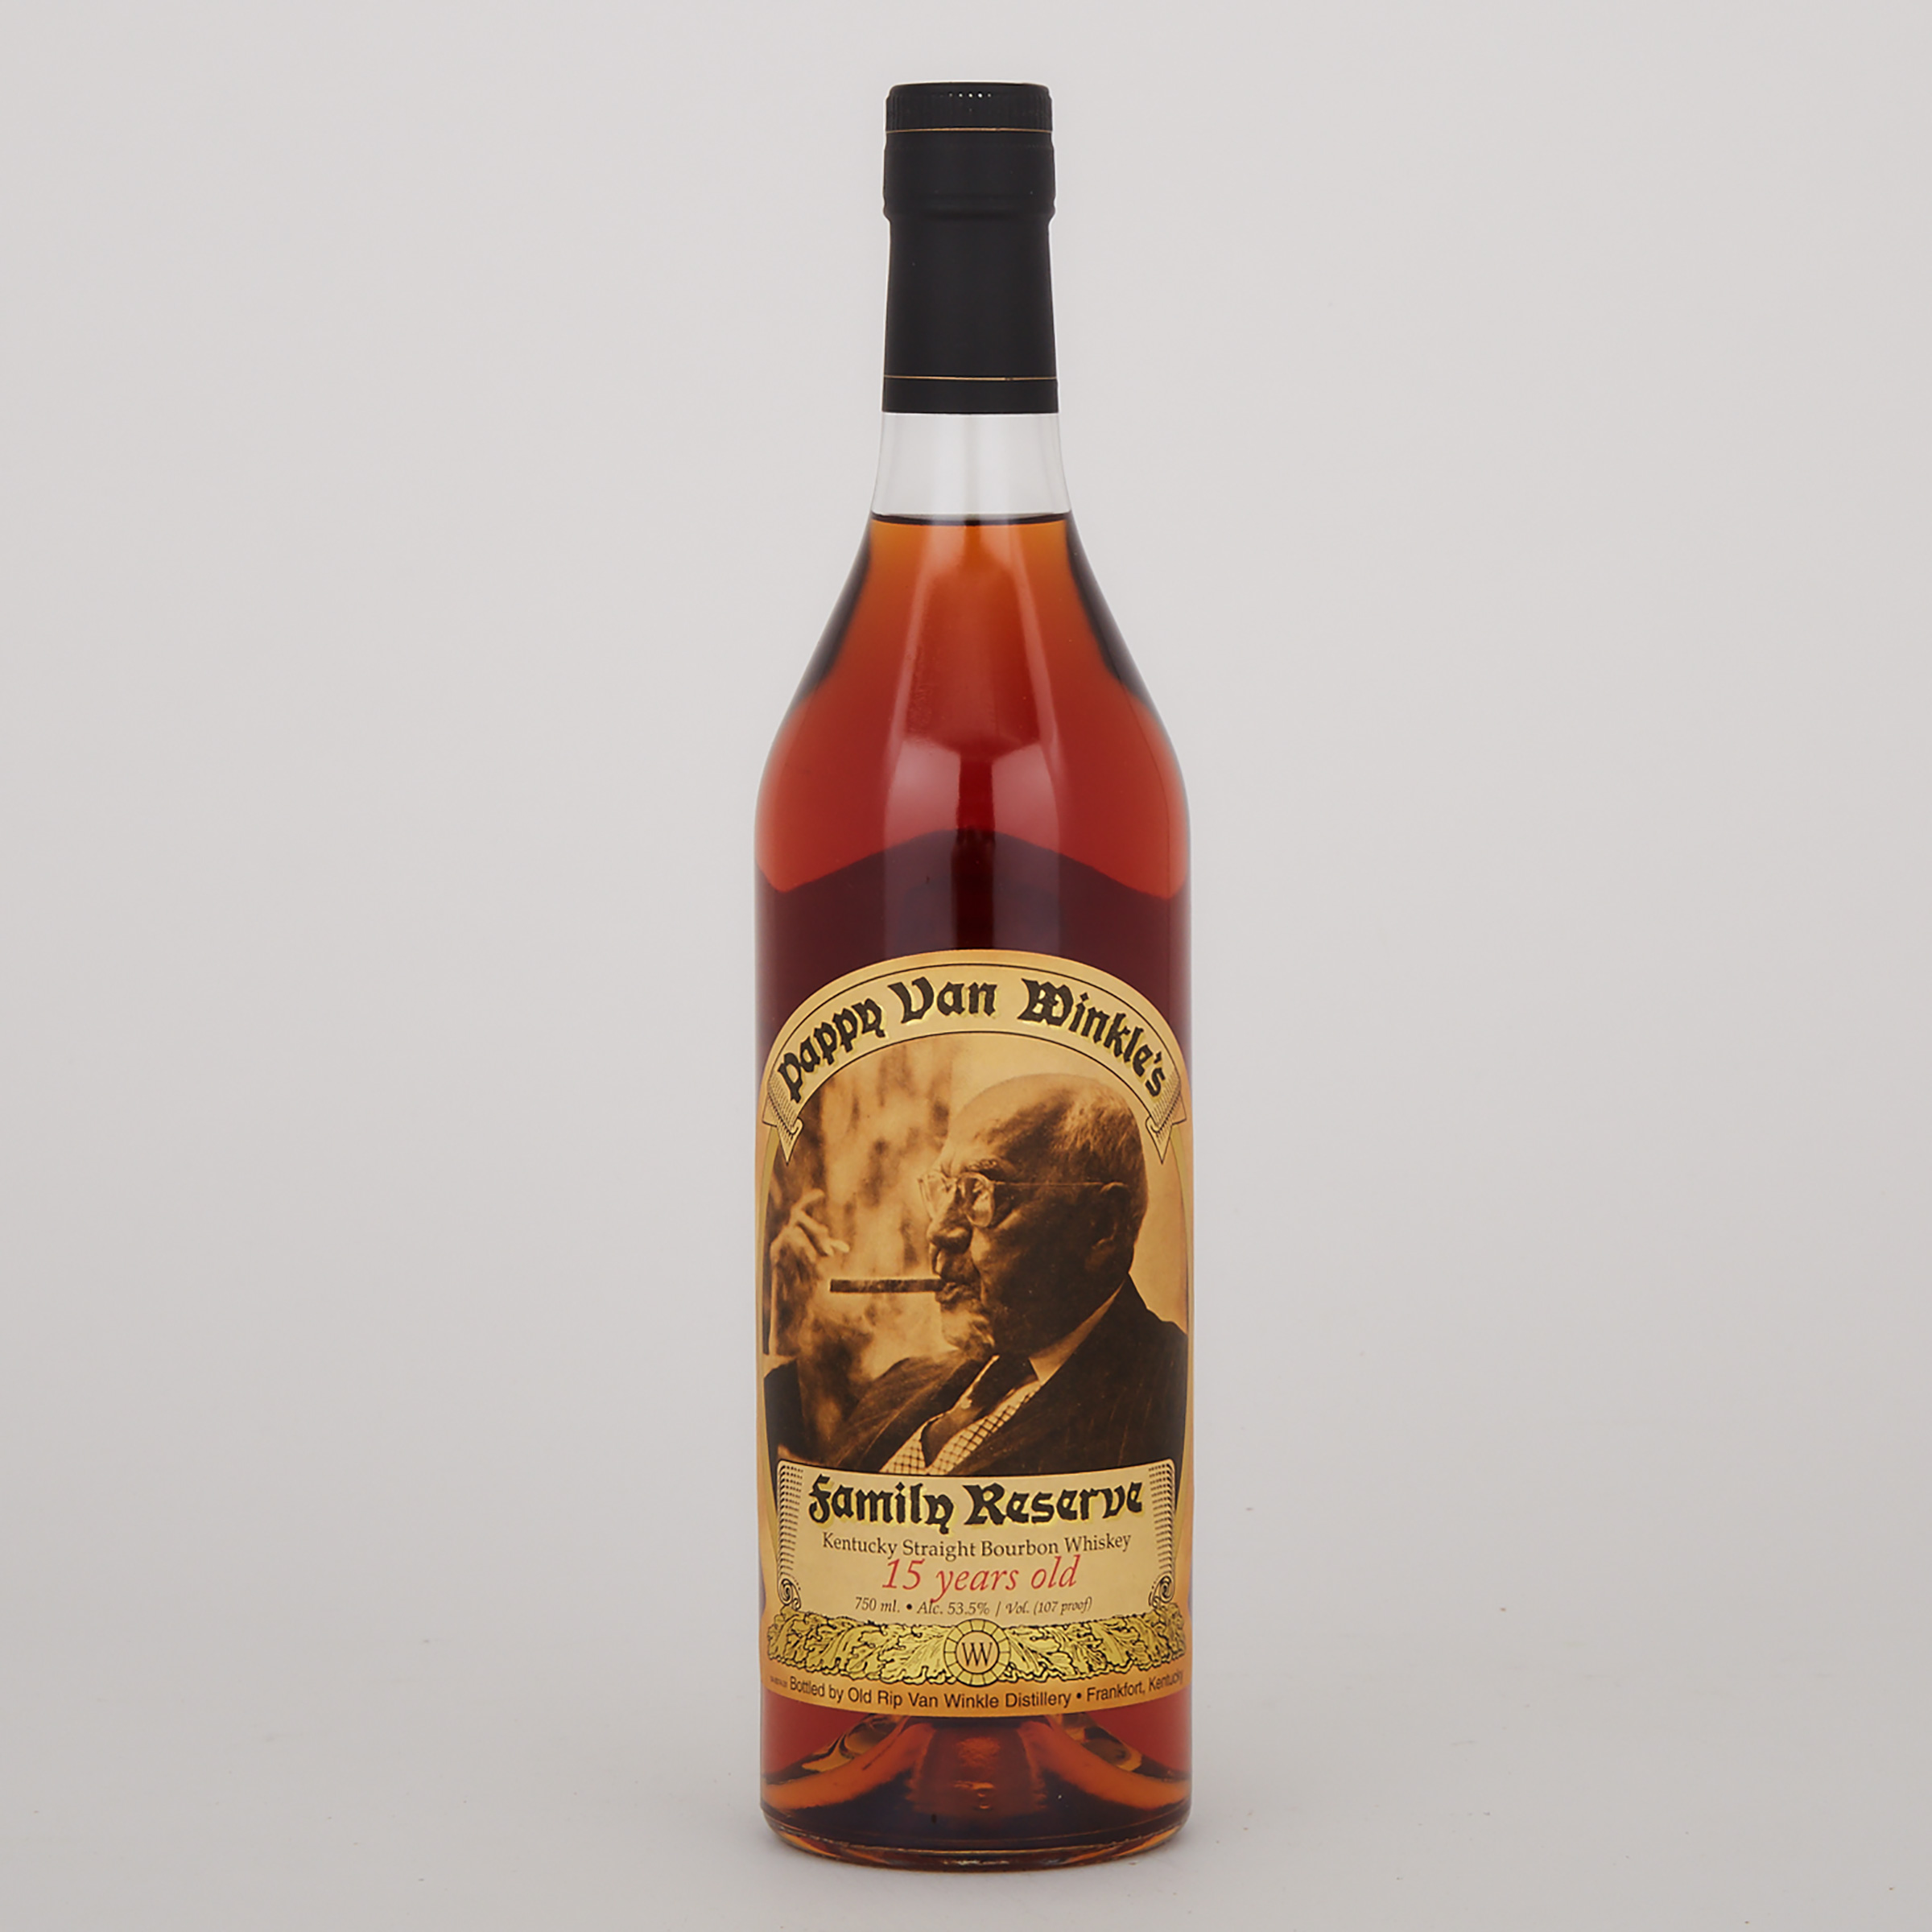 PAPPY VAN WINKLE’S FAMILY RESERVE KENTUCKY STRAIGHT BOURBON WHISKEY 15 YEARS (ONE 750 ML)